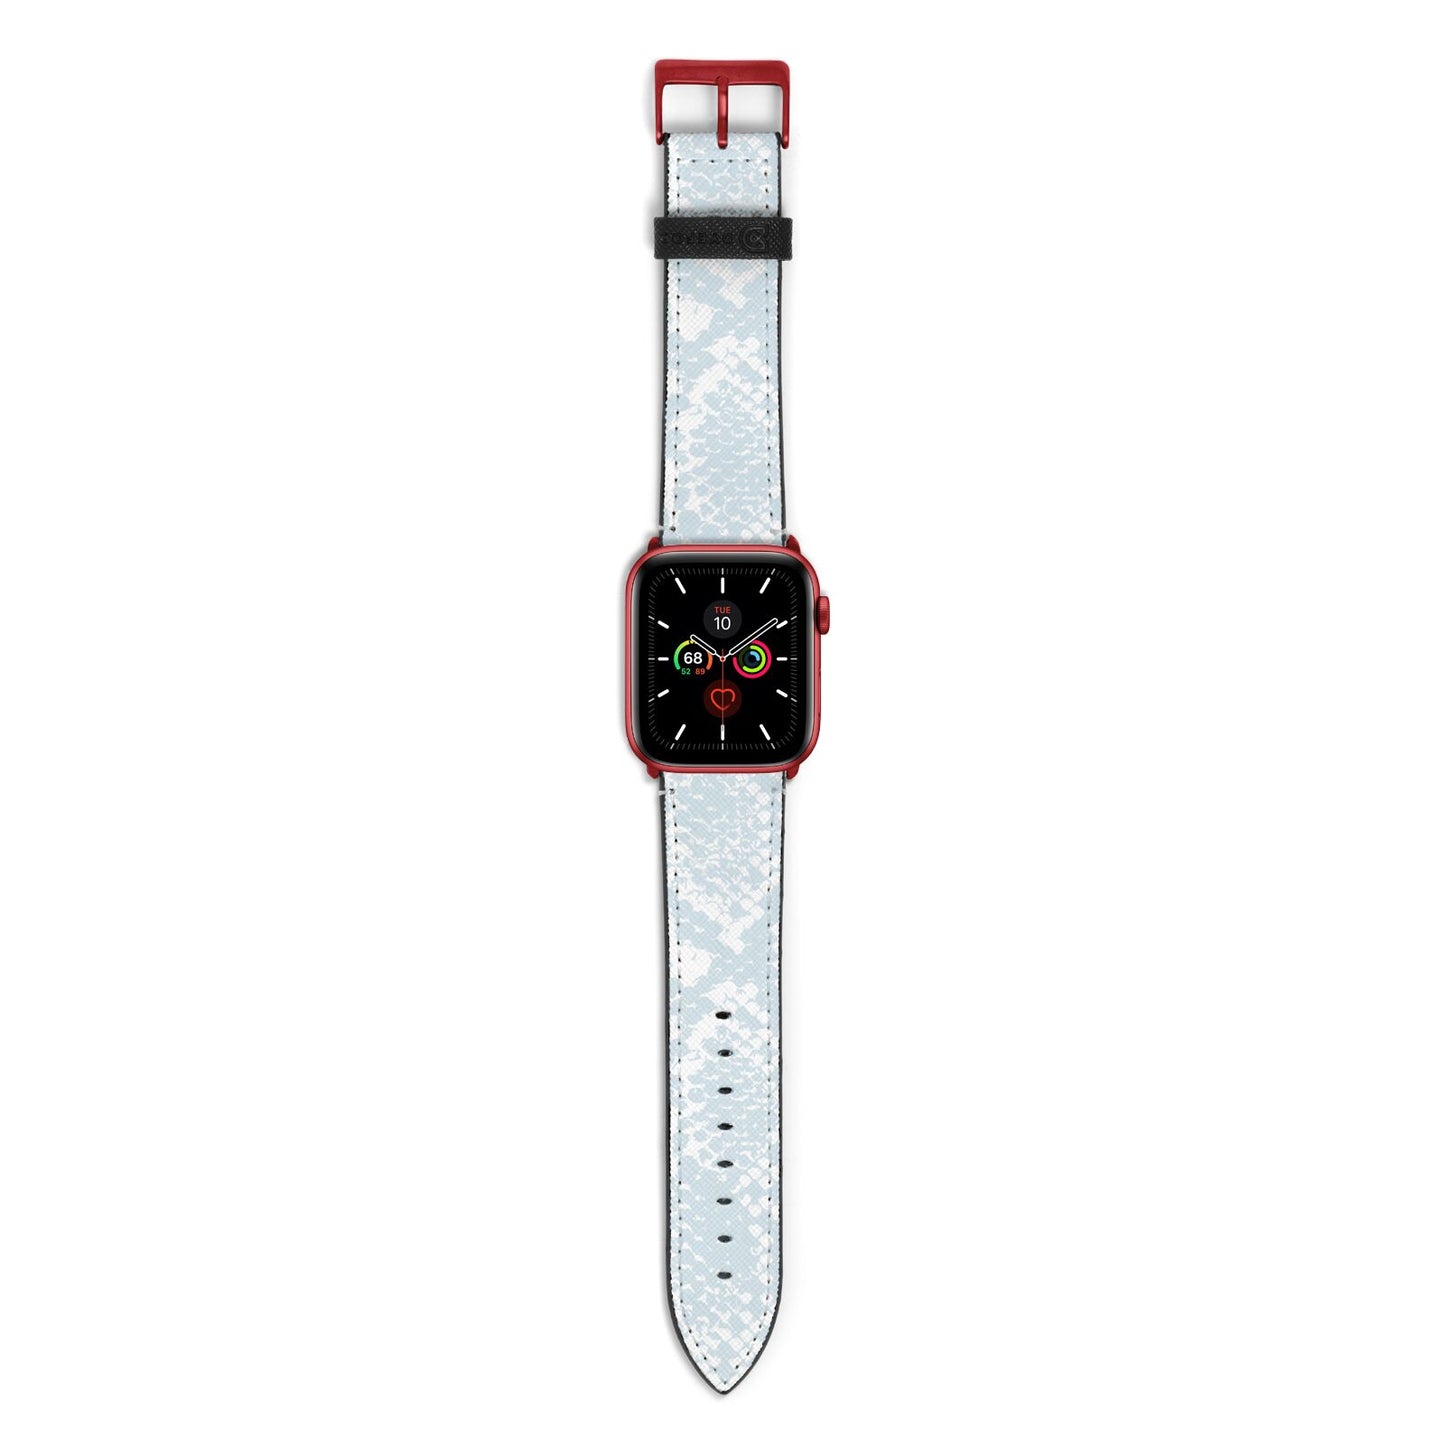 Sky Blue Snakeskin Apple Watch Strap with Red Hardware